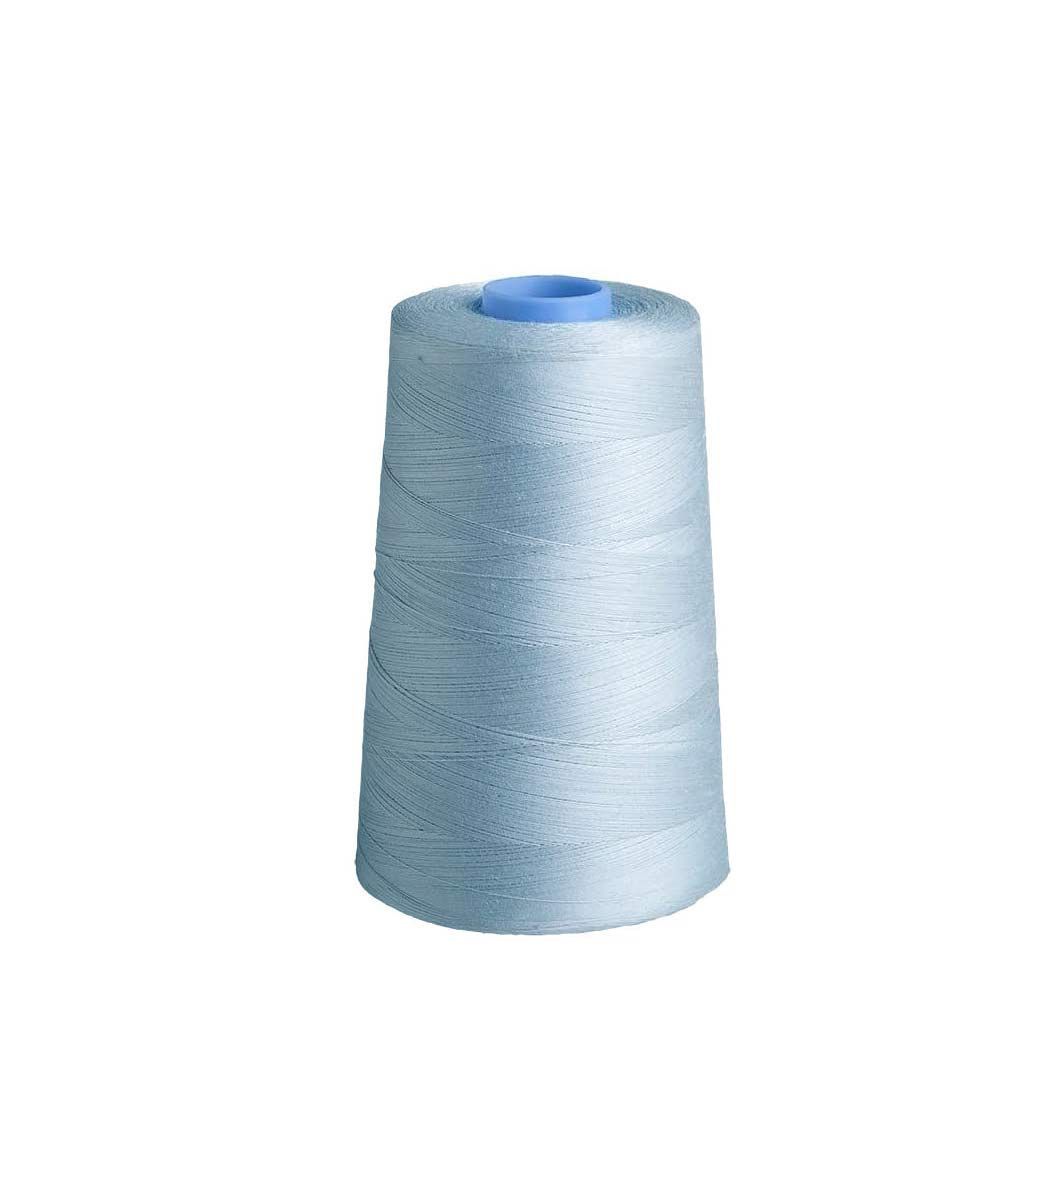  Sewing Threads  Thread Cotton, Professional Sewing NM-60/2-2